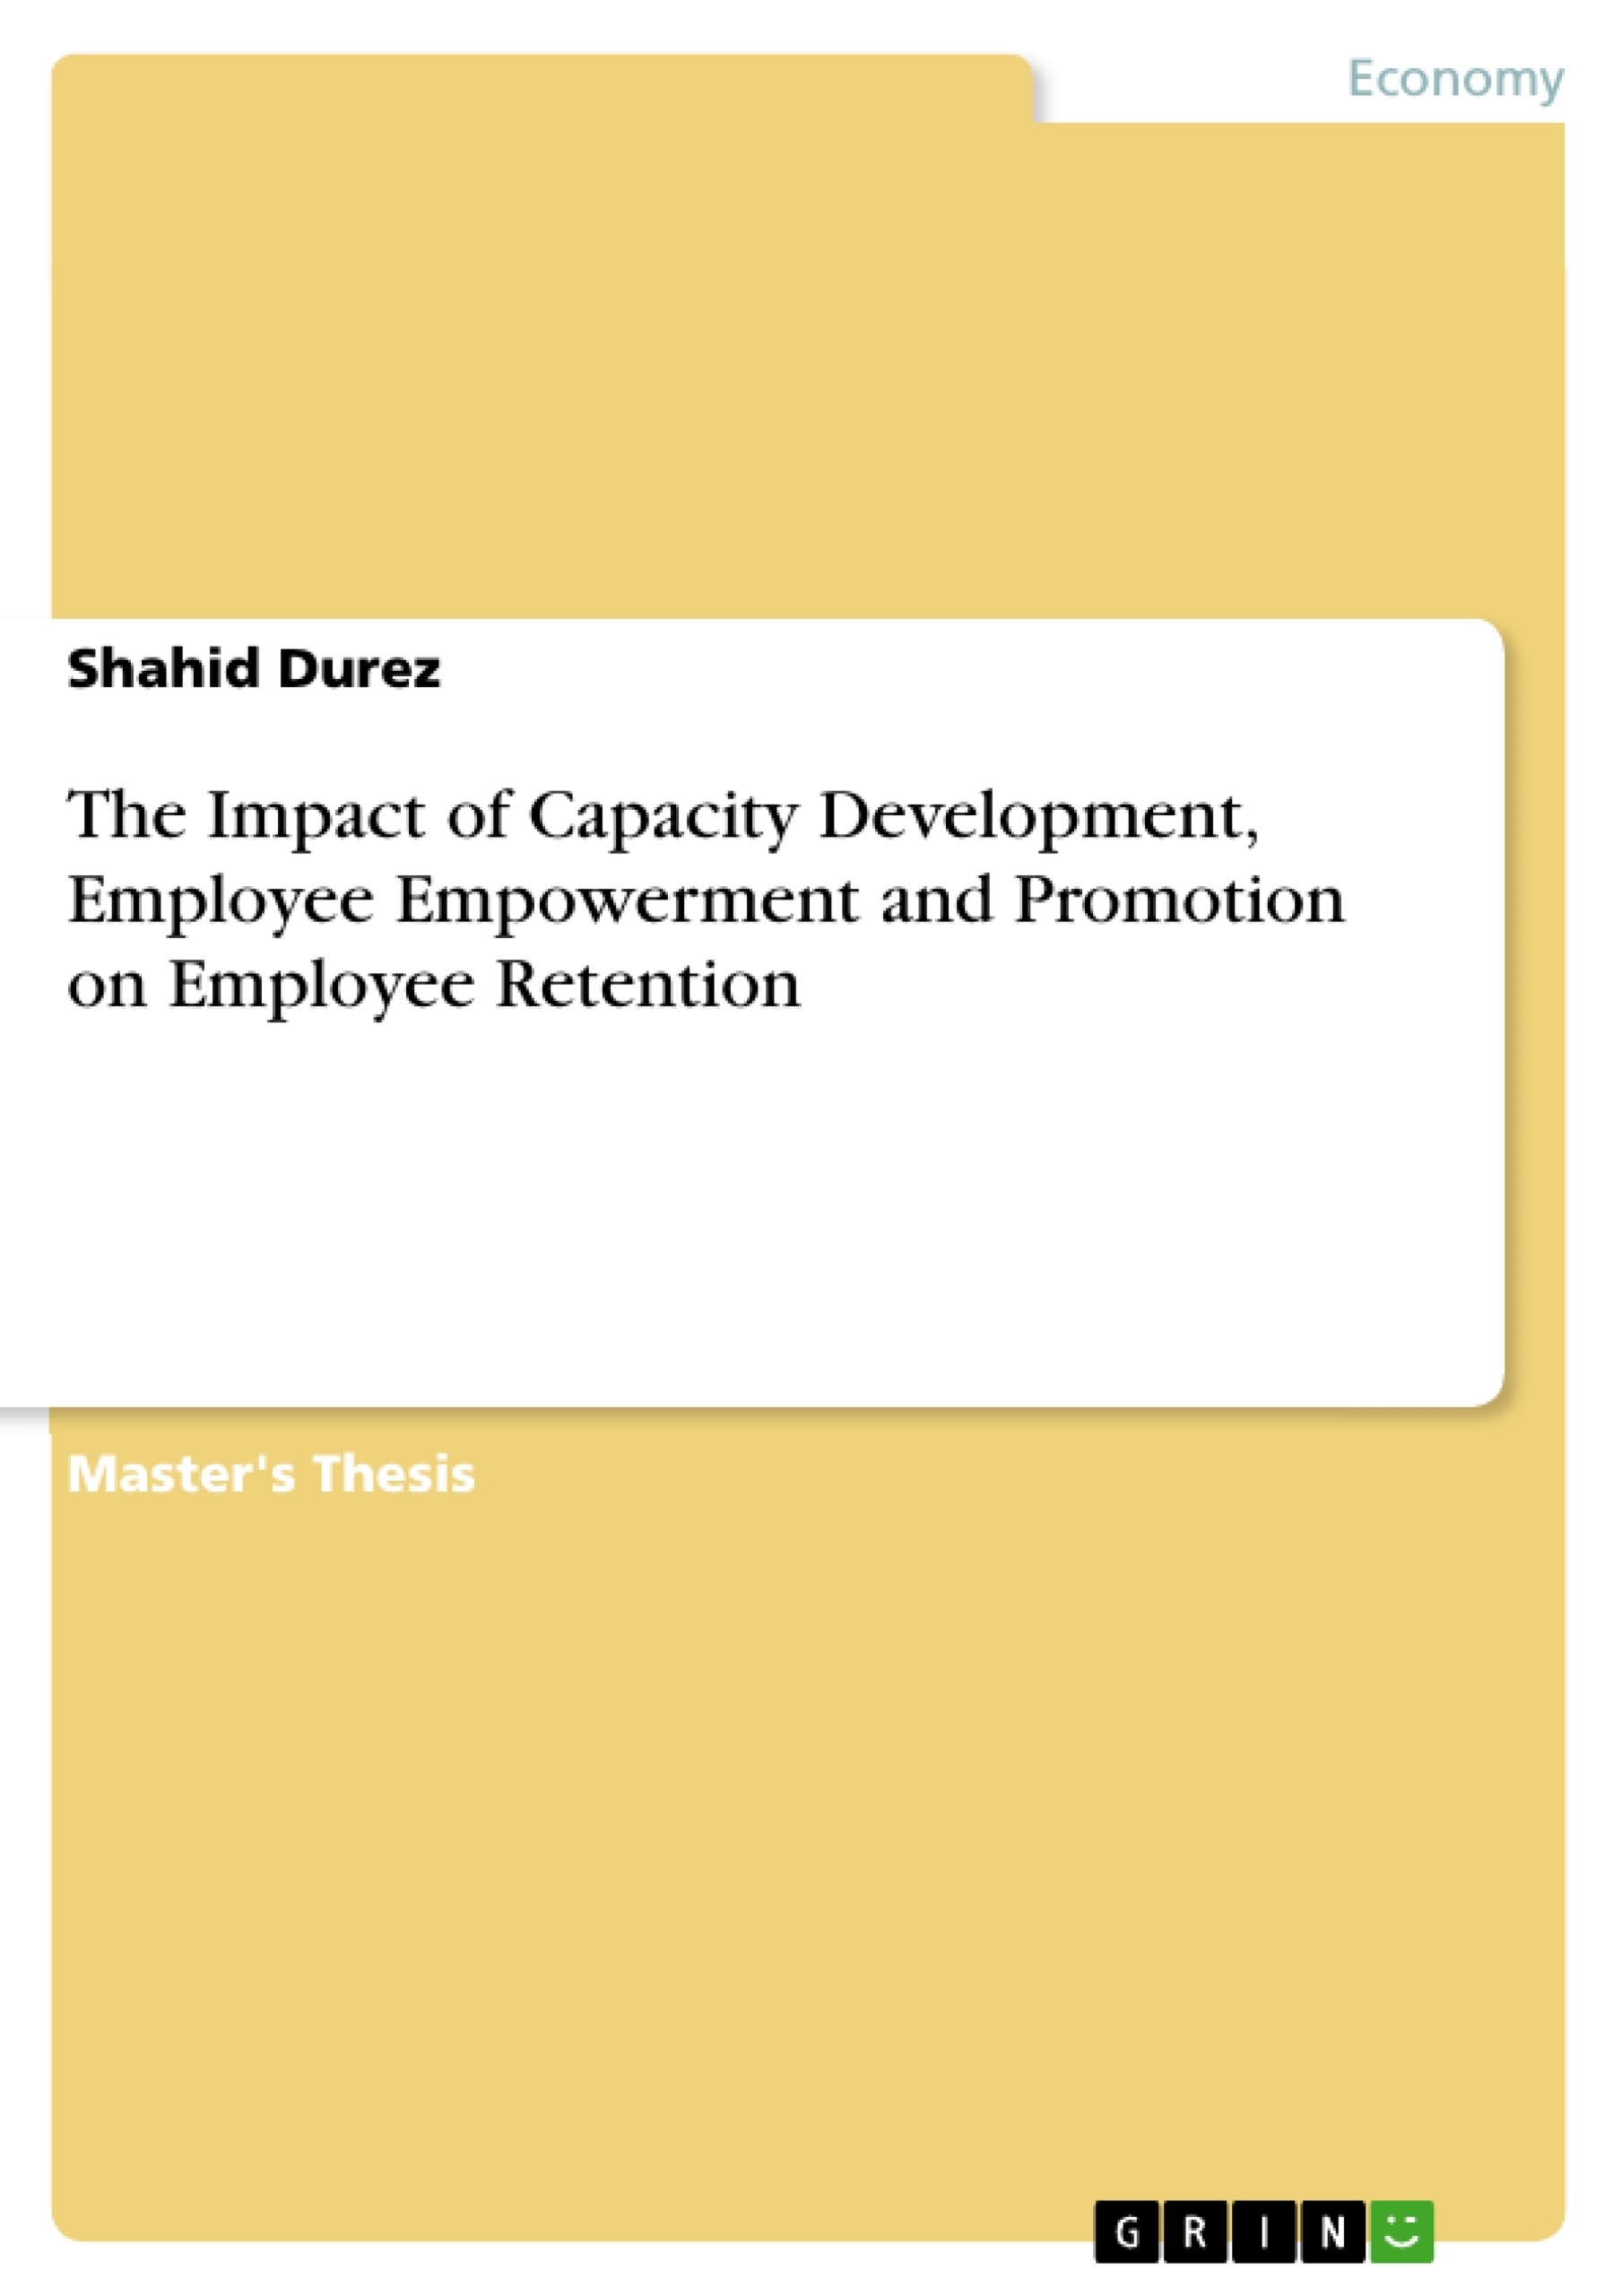 Title: The Impact of Capacity Development, Employee Empowerment and Promotion on Employee Retention